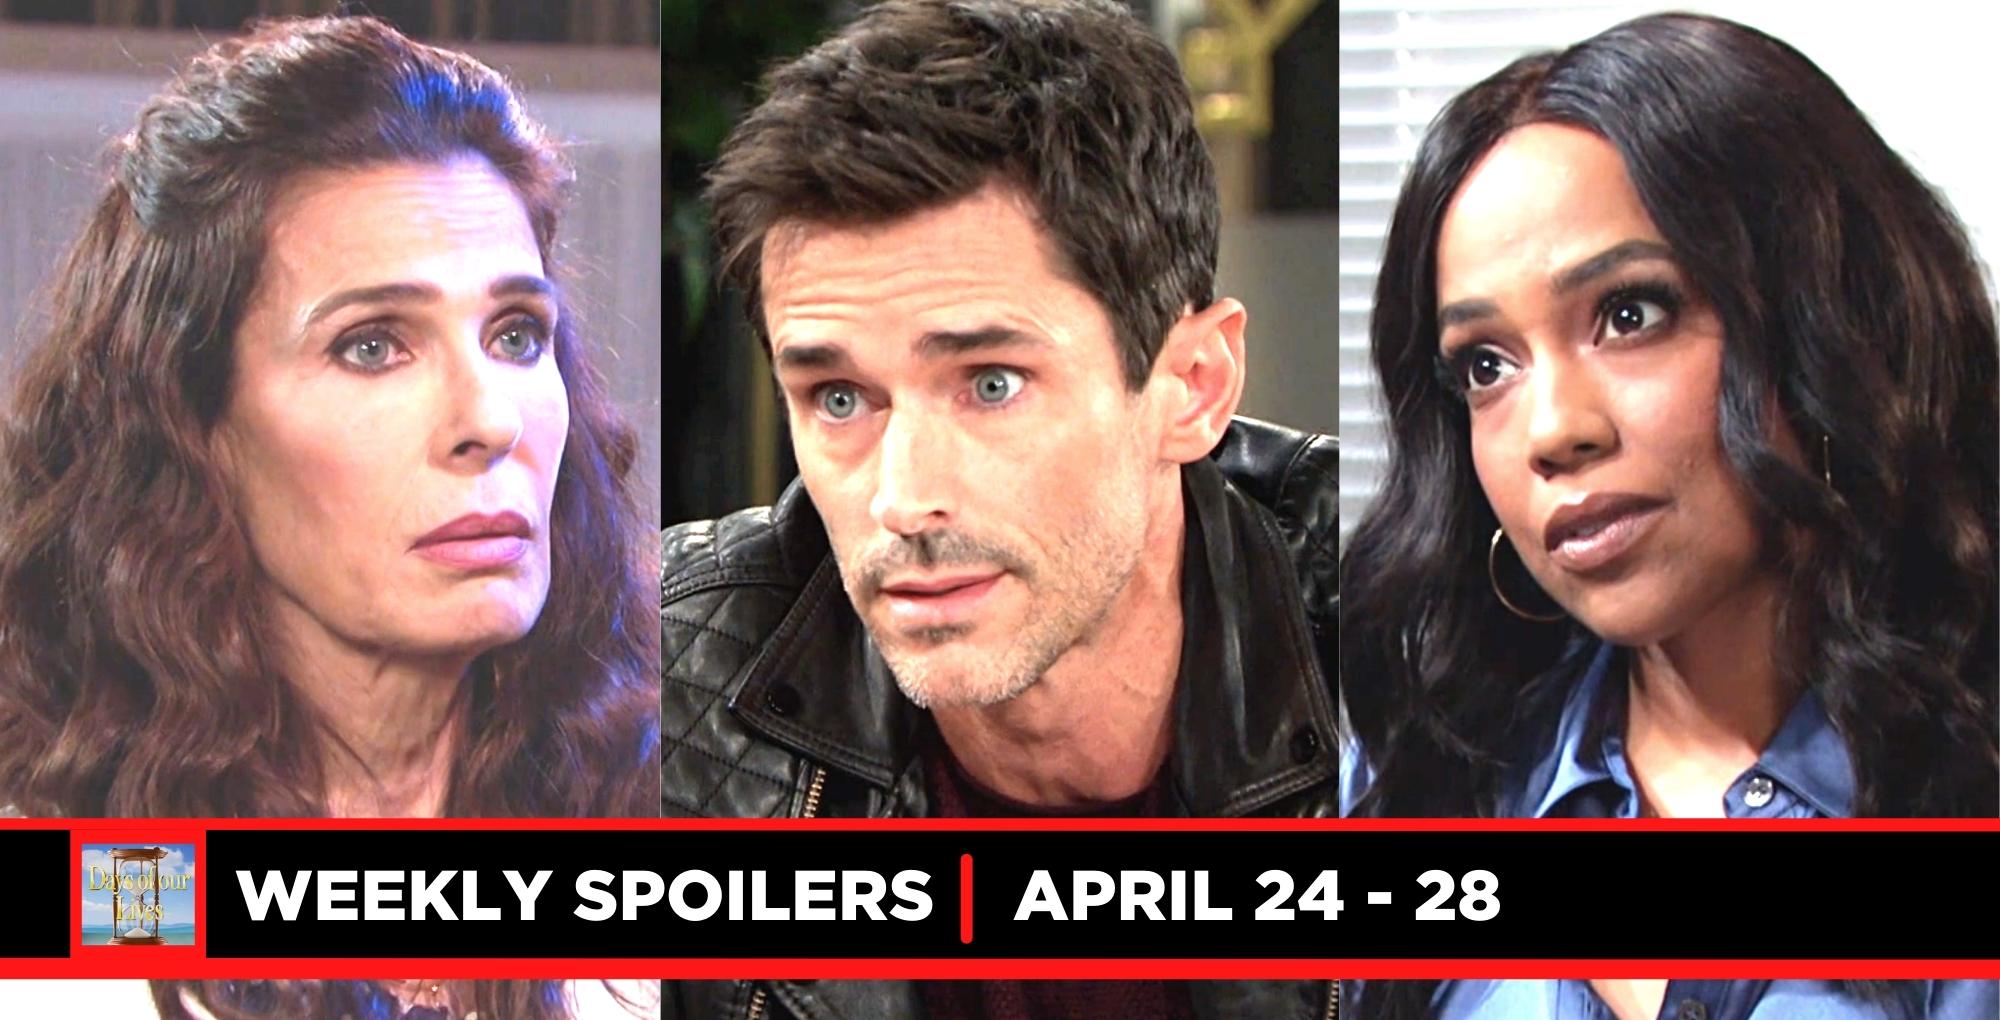 days of our lives spoilers for april 24 – april 28, 2023, three images hope, shawn, and jada.